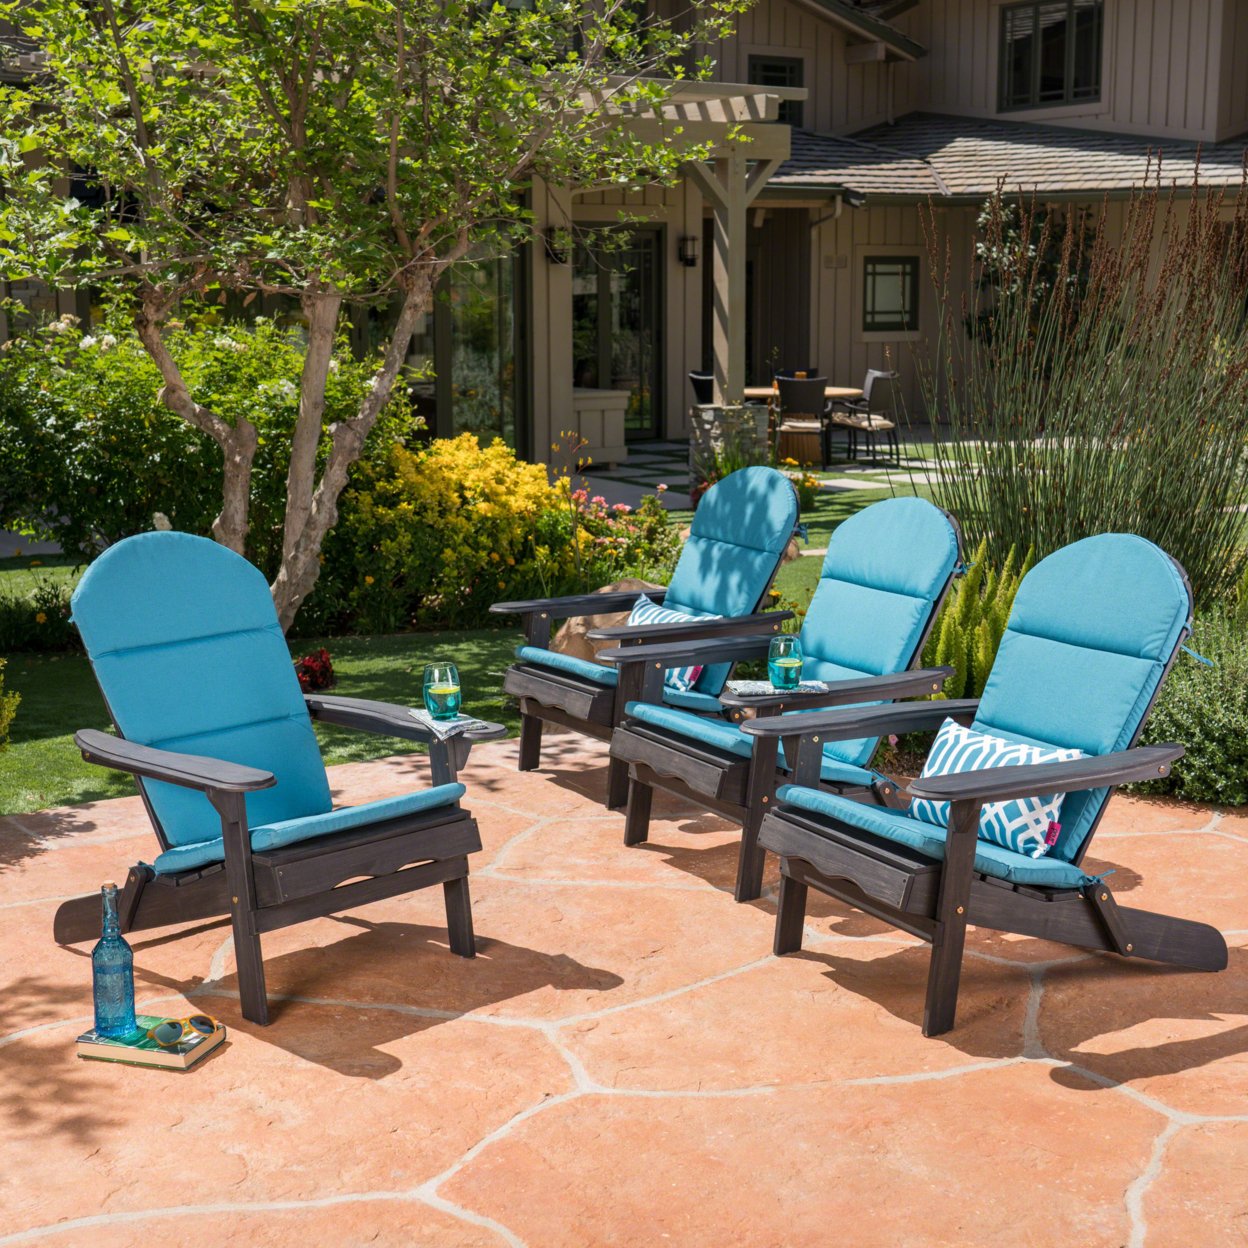 Nelie Outdoor Acacia Wood Adirondack Chairs With Cushions - Dark Teal, Set Of 4